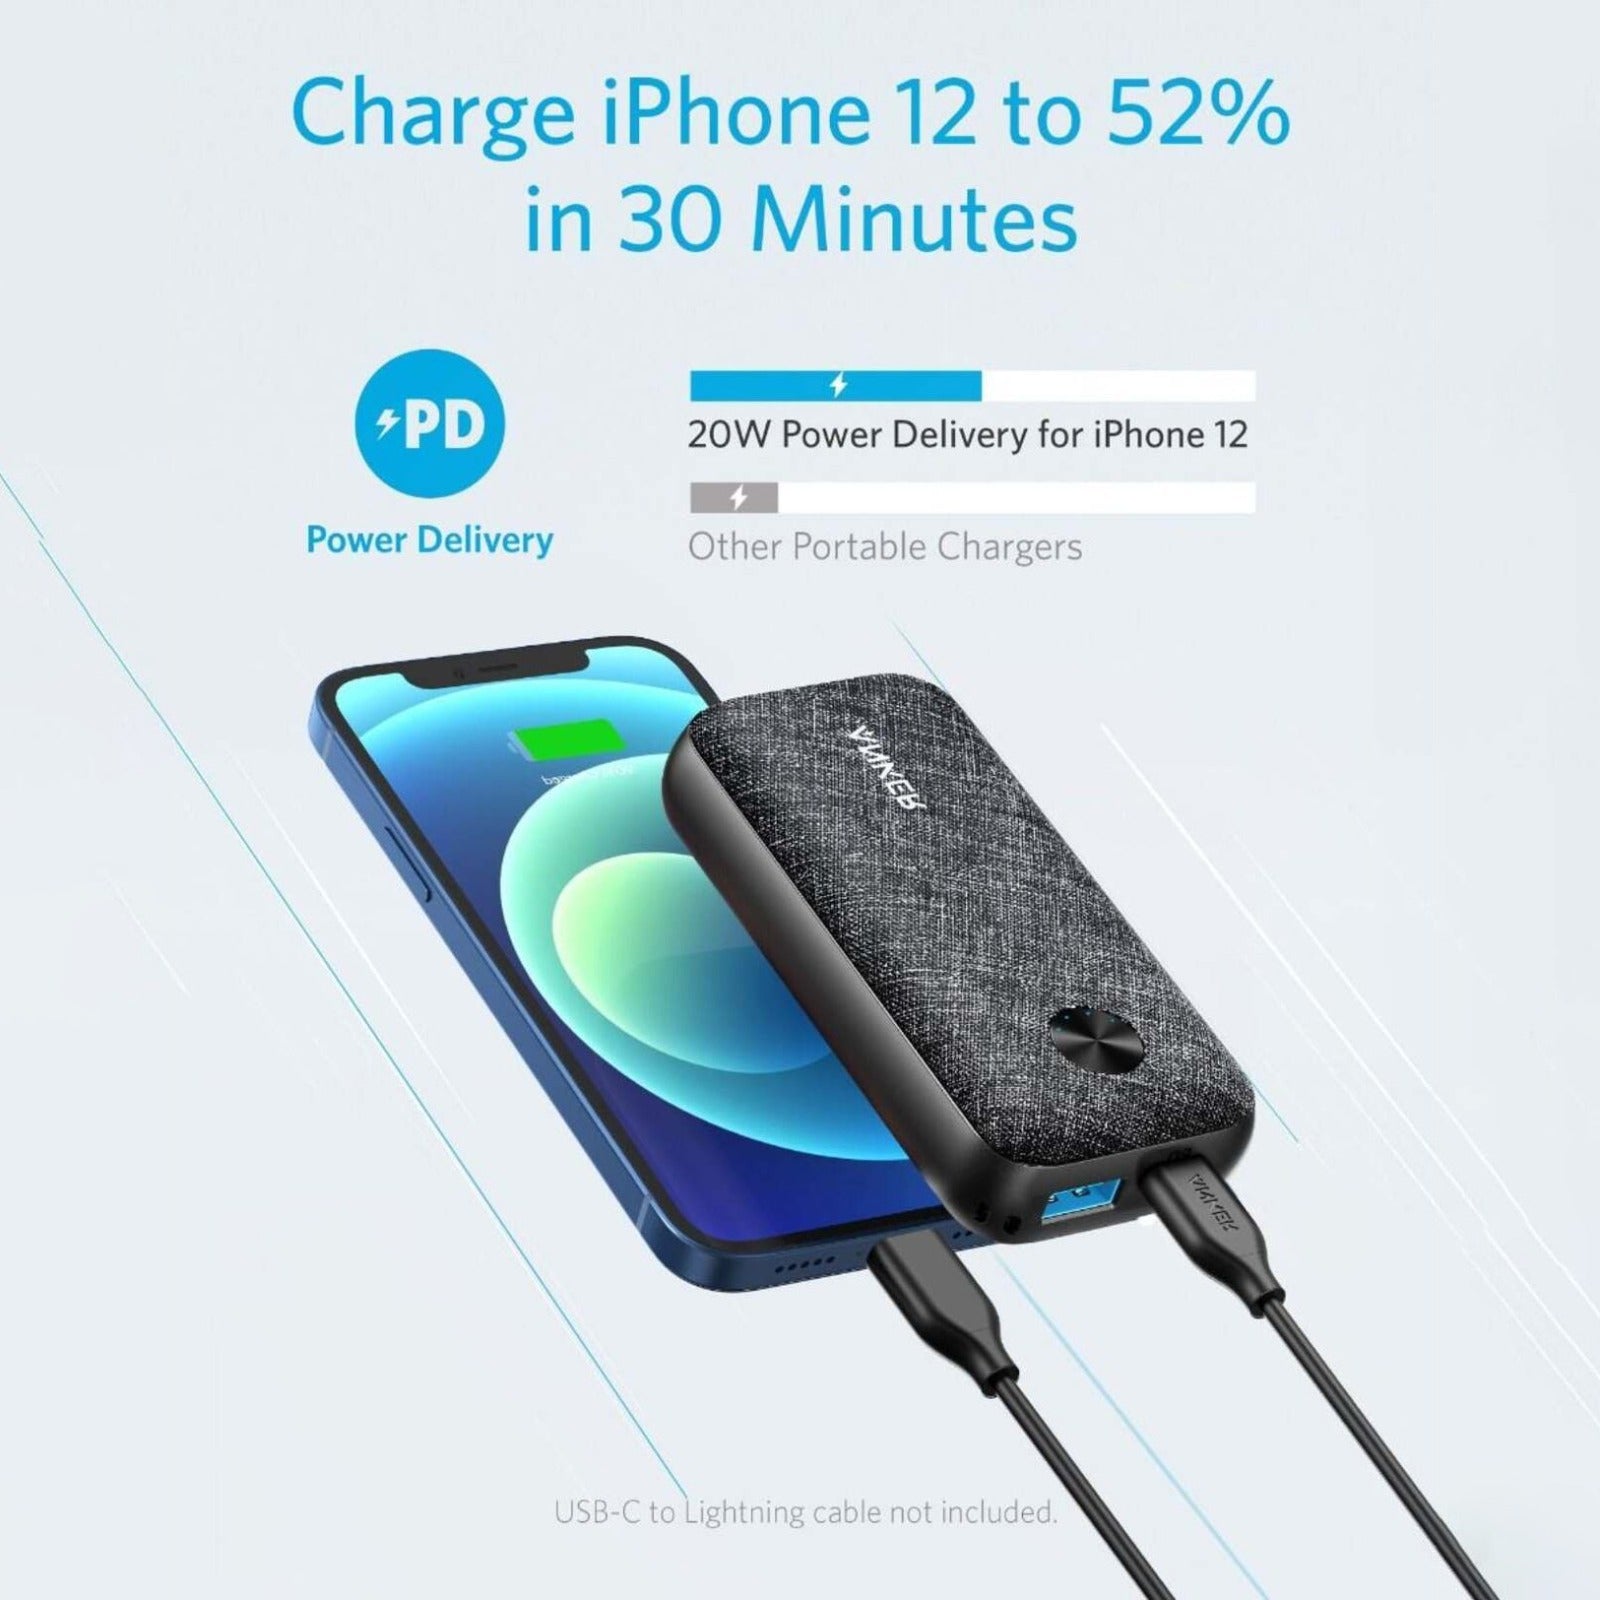 iPhone 12 charging from 12% to 52% in just 30 minutes, powered by the Anker PowerCore Metro 10000mAh Fast Charging Power Bank